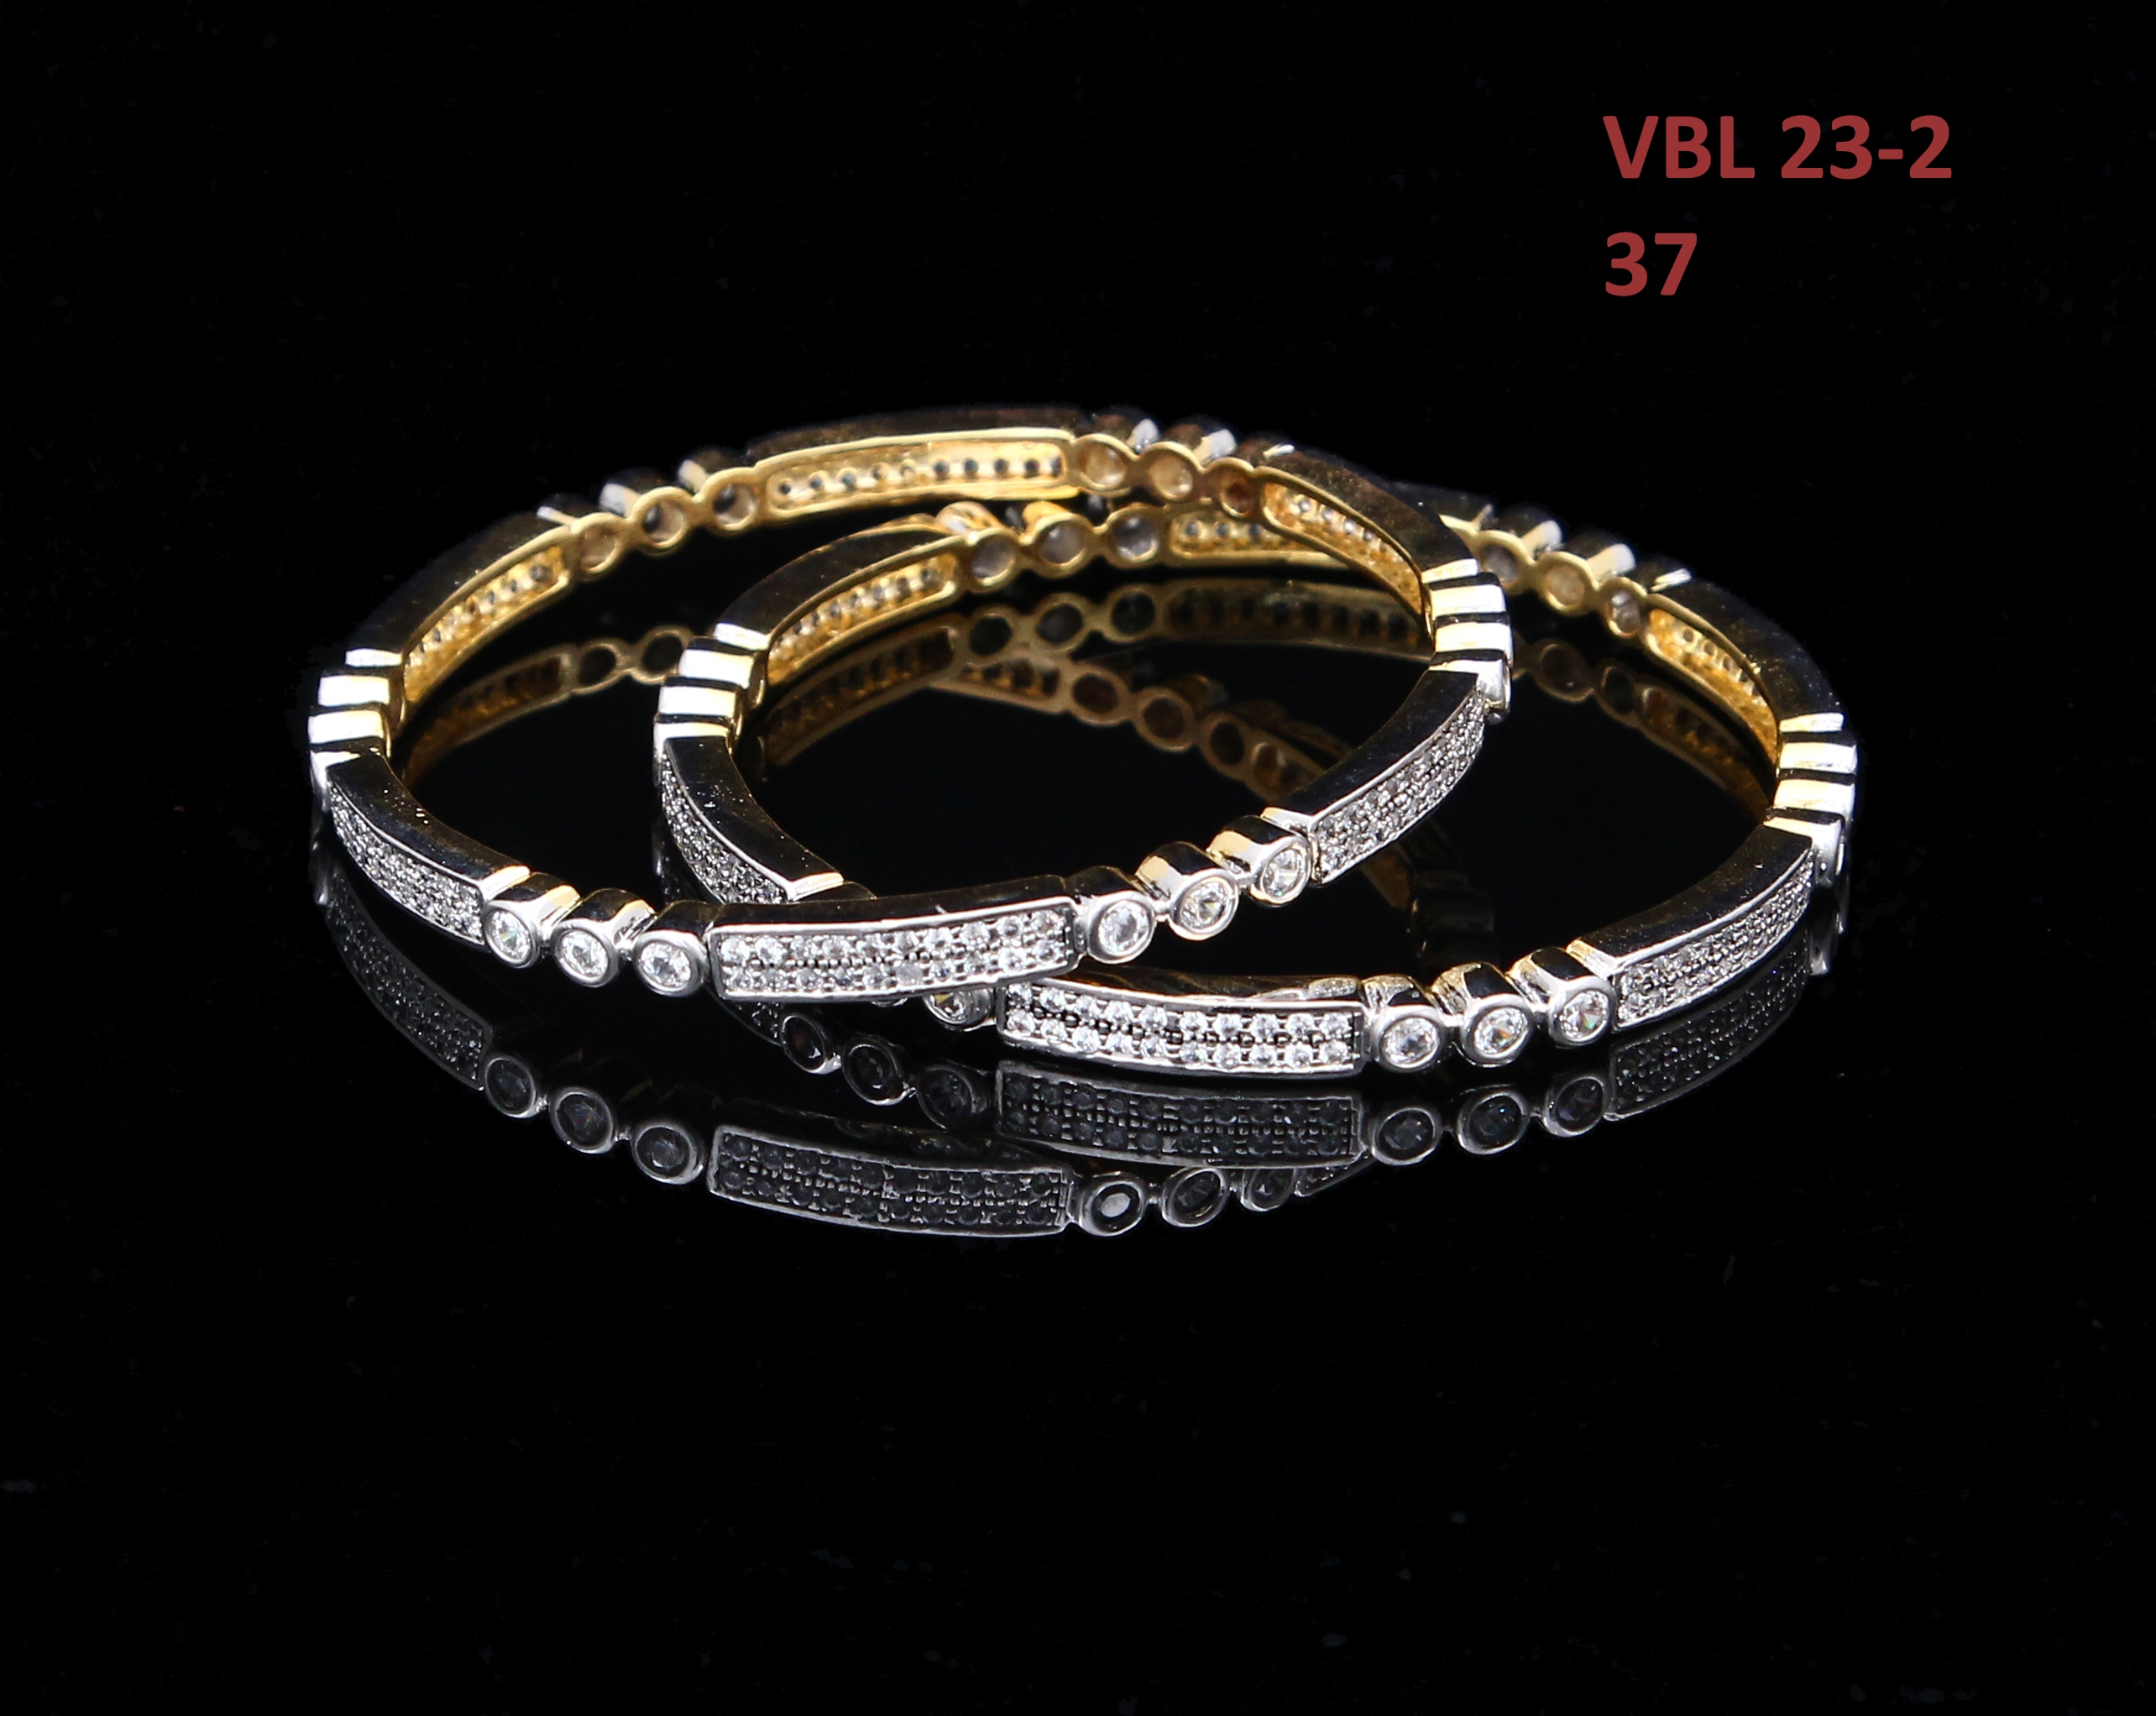 55Carat | 55Carat Unique Fashion jewellery Exclusive Jewellery Gold-Plated Bangle set of 2 For Womens and Girls